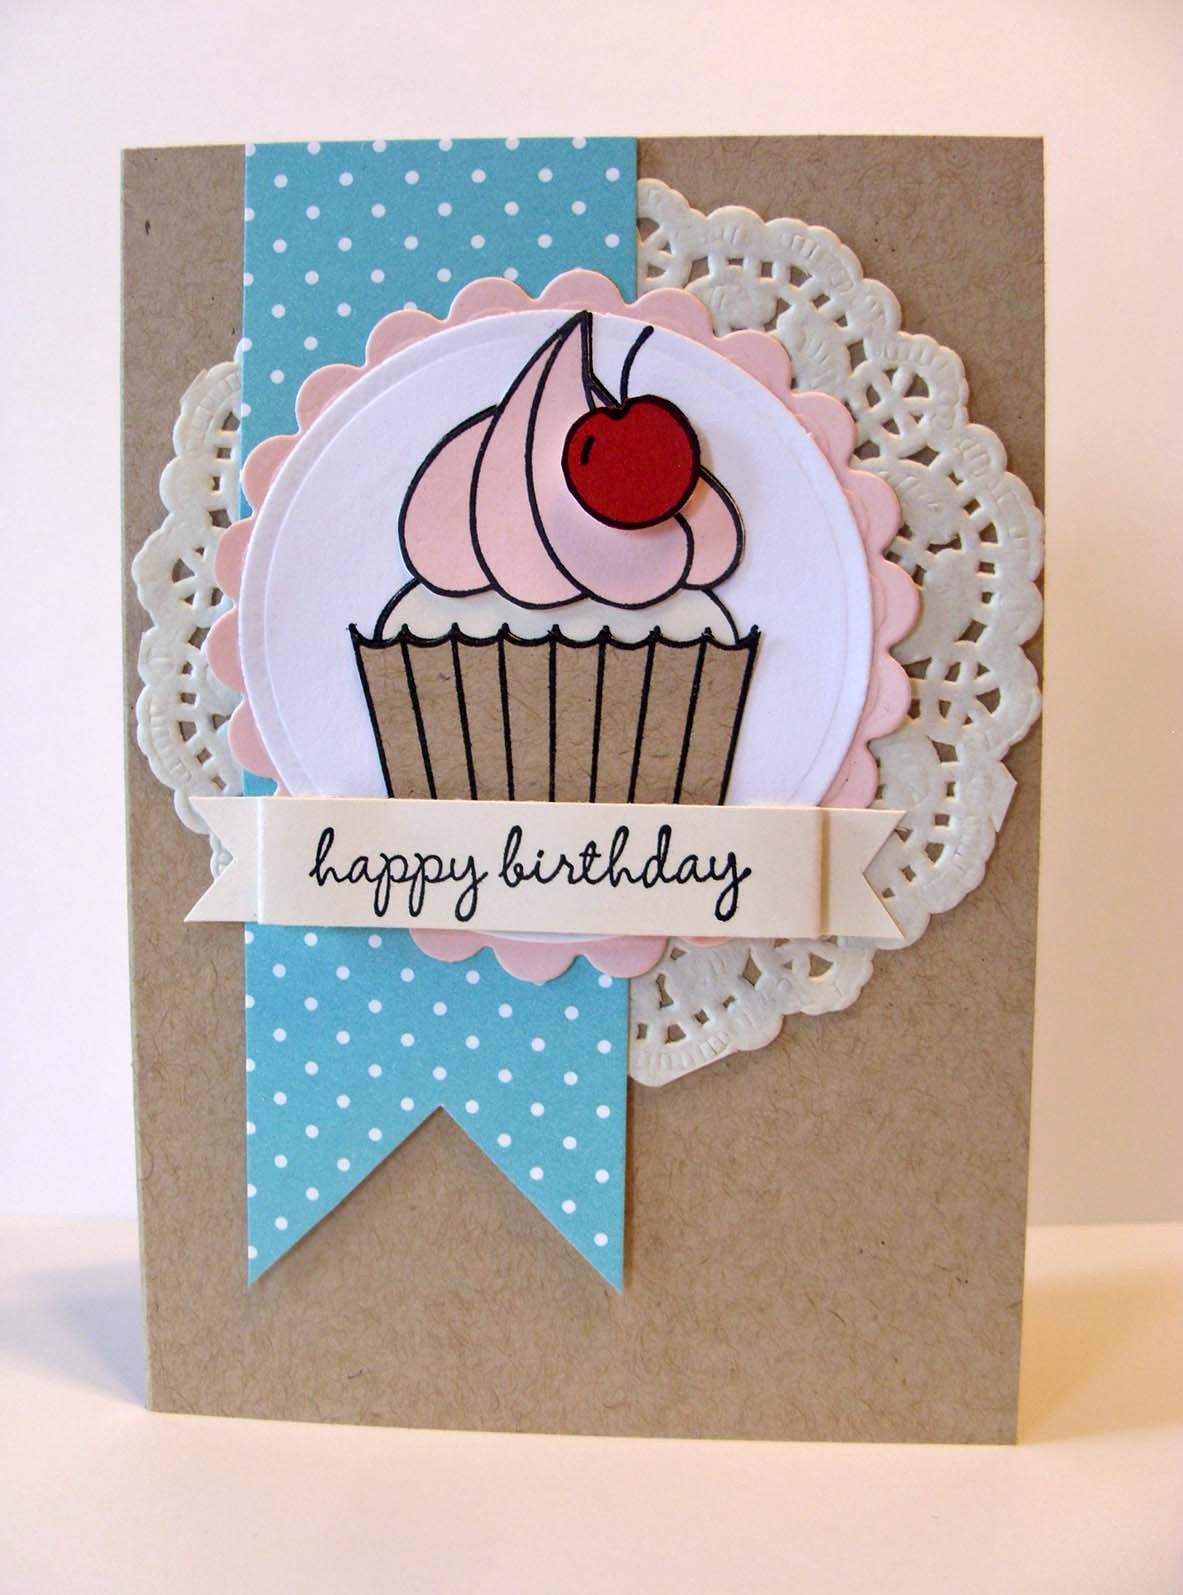 Birthday Card Decorations
 Step by Step Tutorials on How to Make DIY Birthday Cards